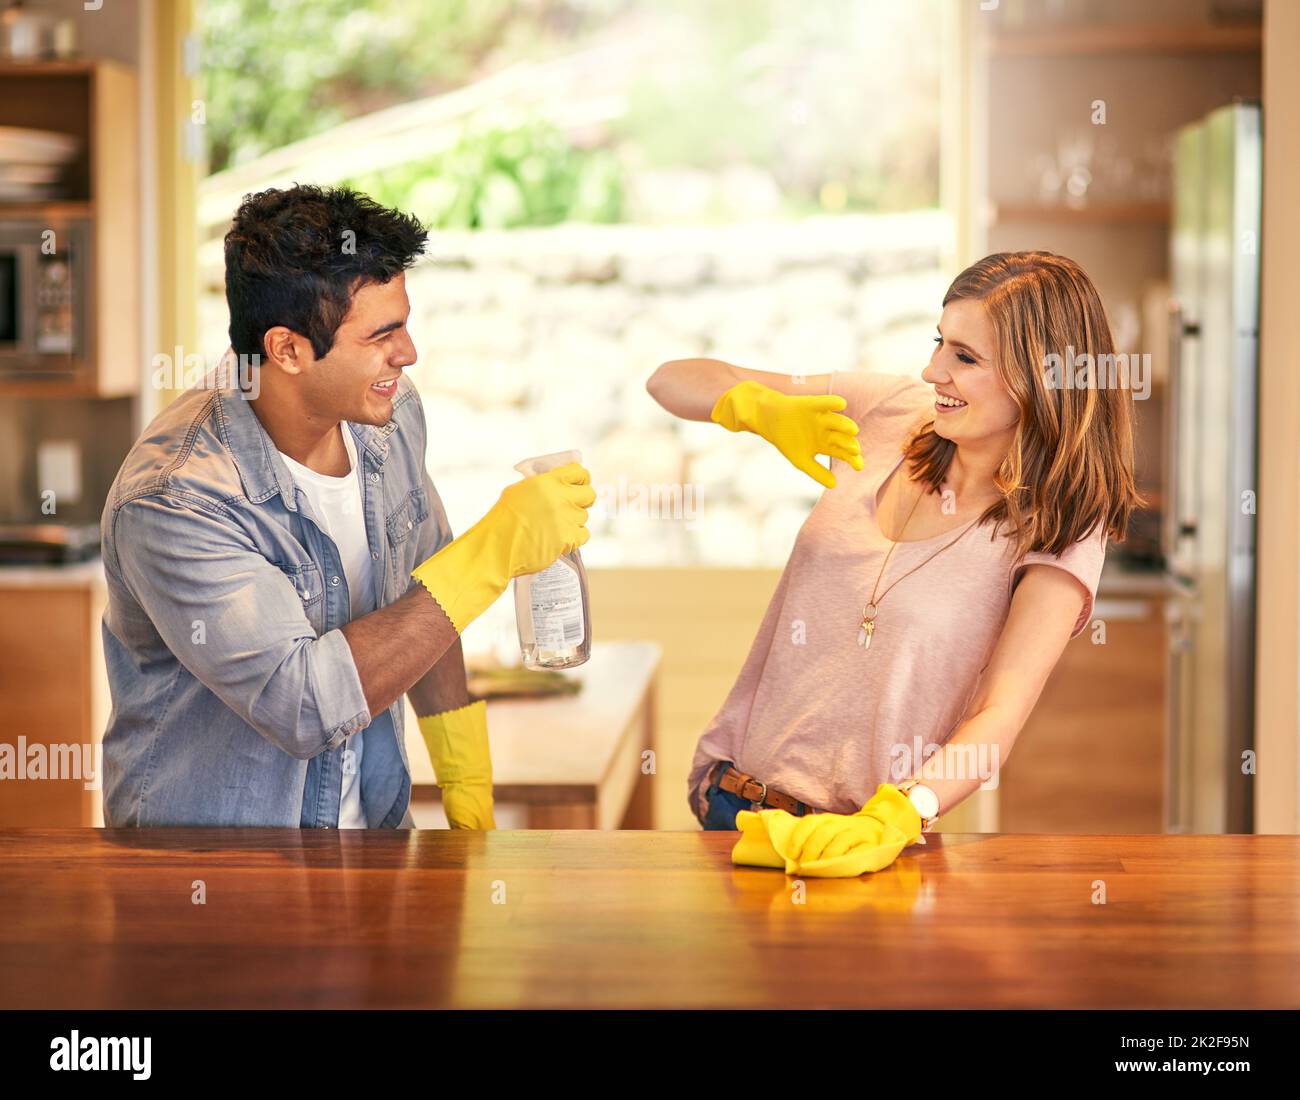 Adding a little fun to their housework. Shot of a young couple messing around while cleaning the kitchen. Stock Photo